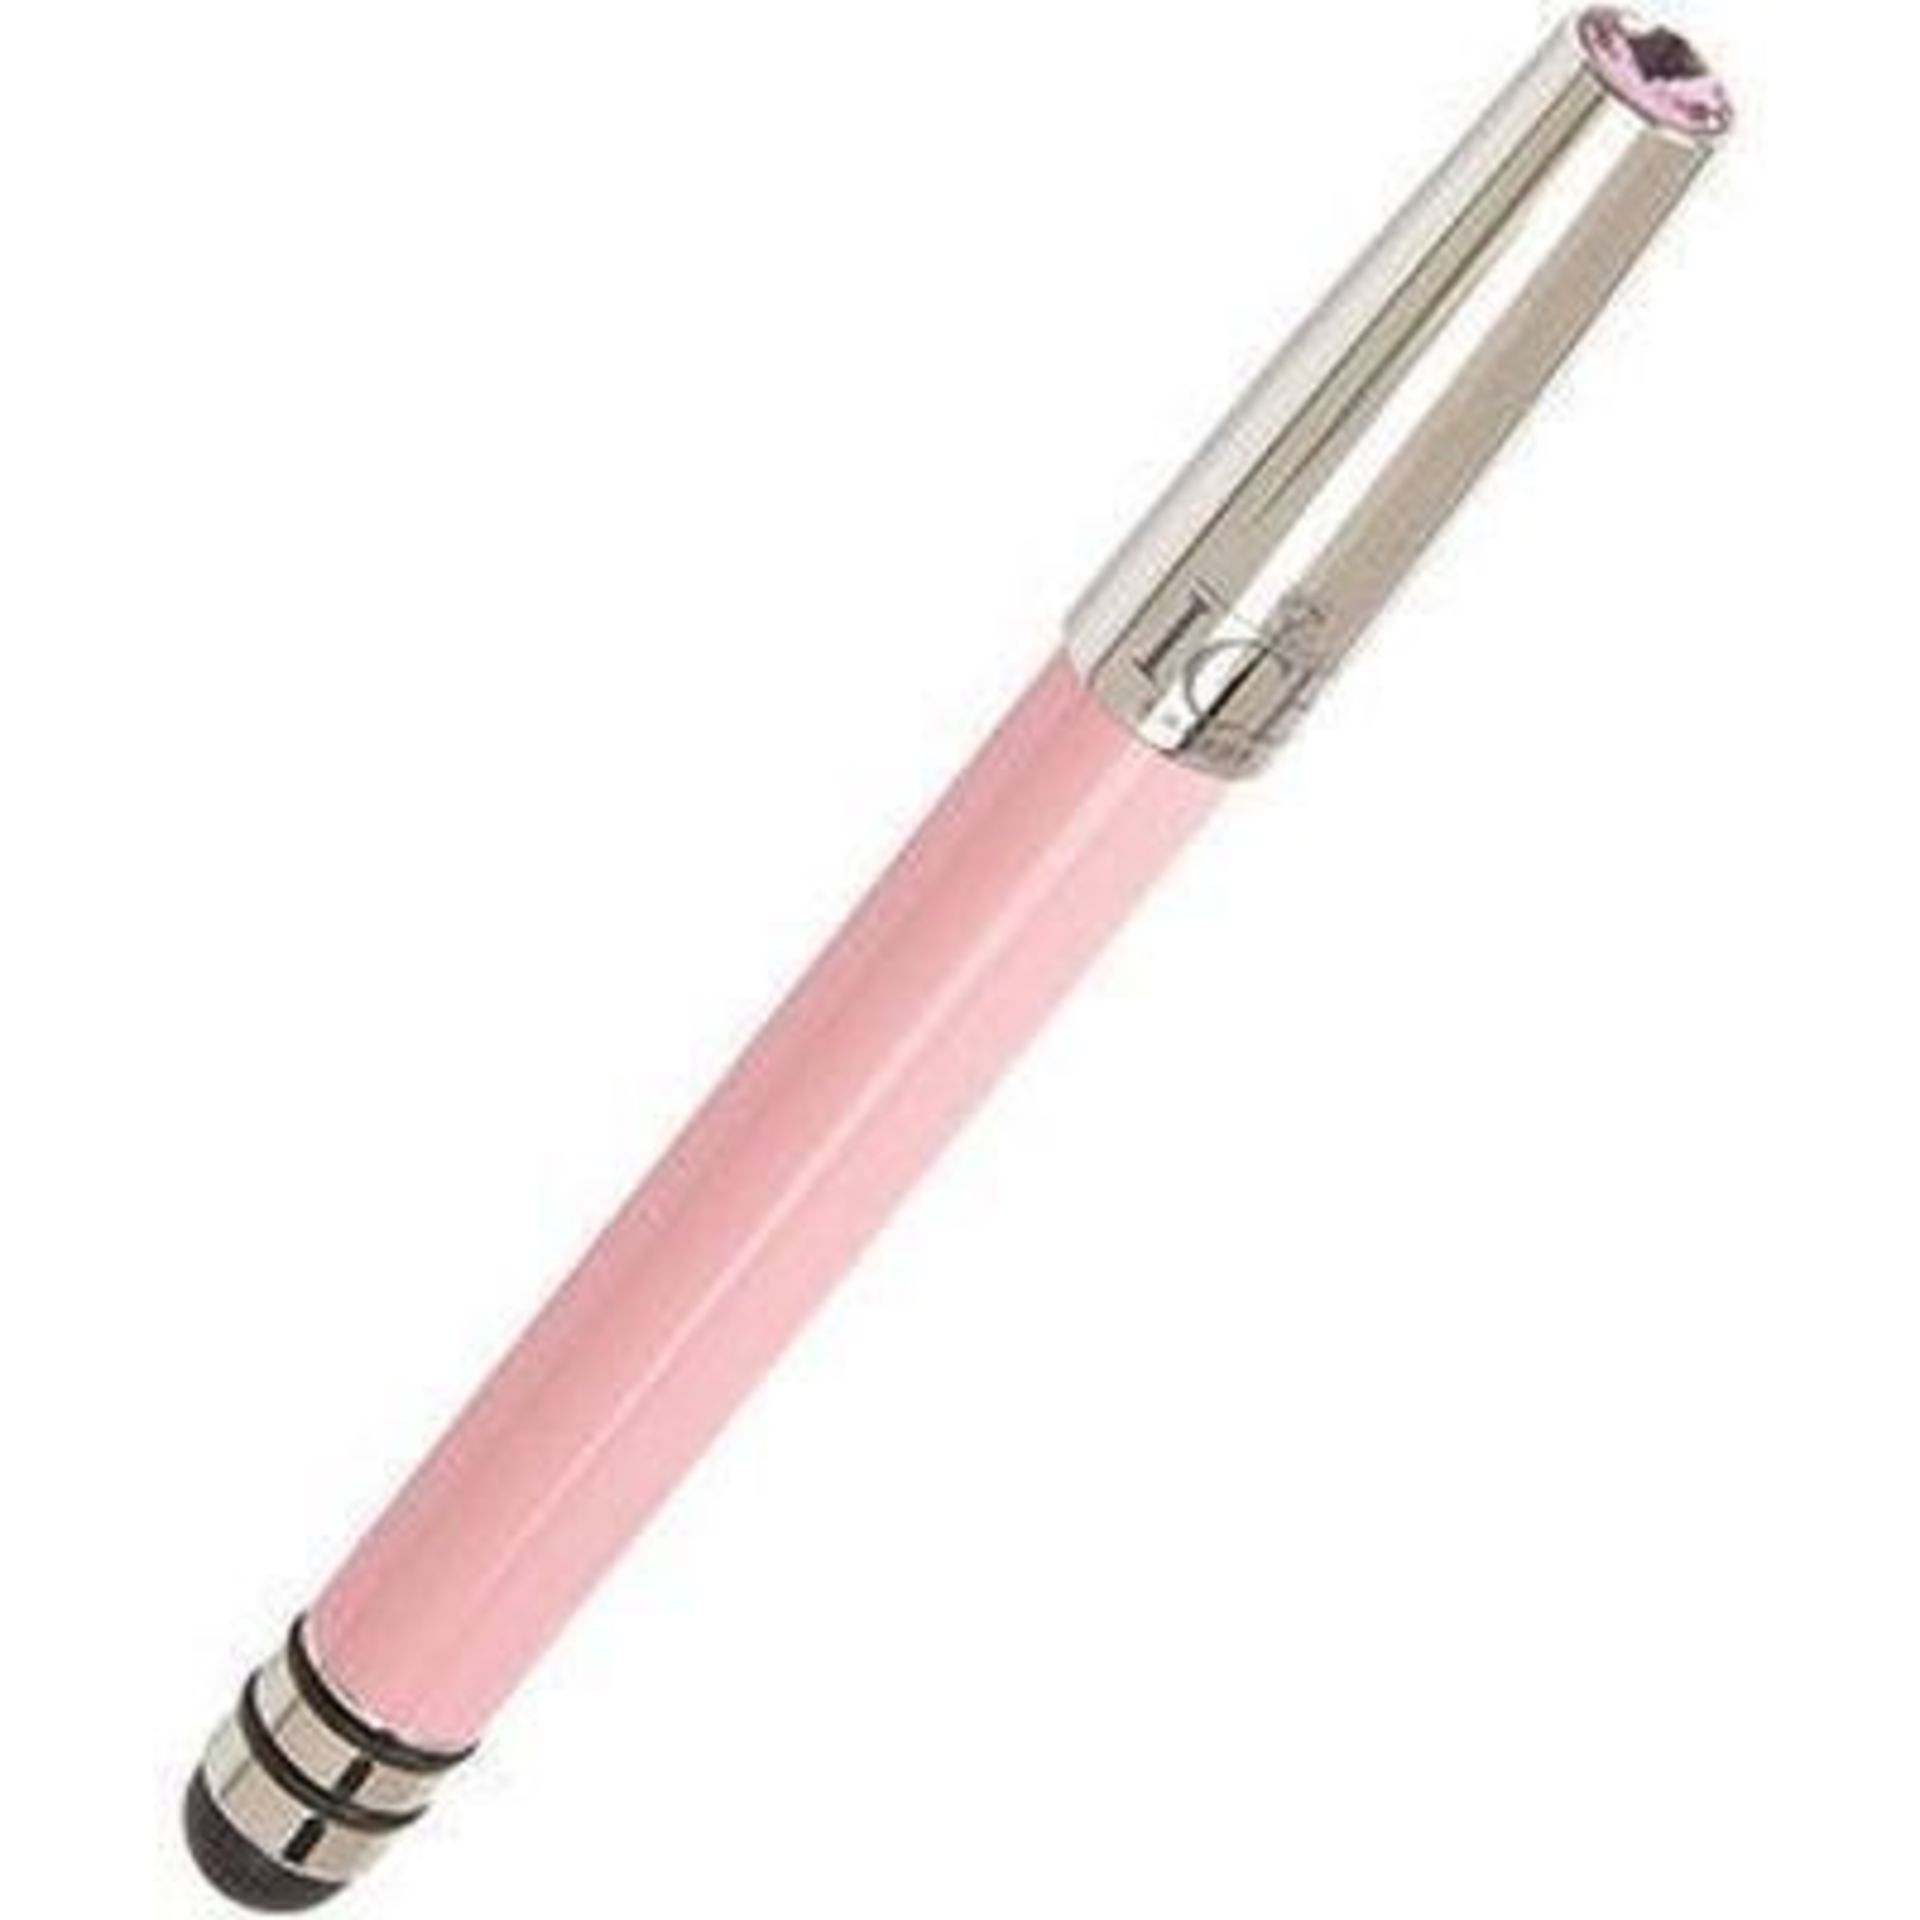 10 x ICE LONDON App Pen Duo - Touch Stylus And Ink Pen Combined - Colour: LIGHT PINK - MADE WITH - Image 4 of 5